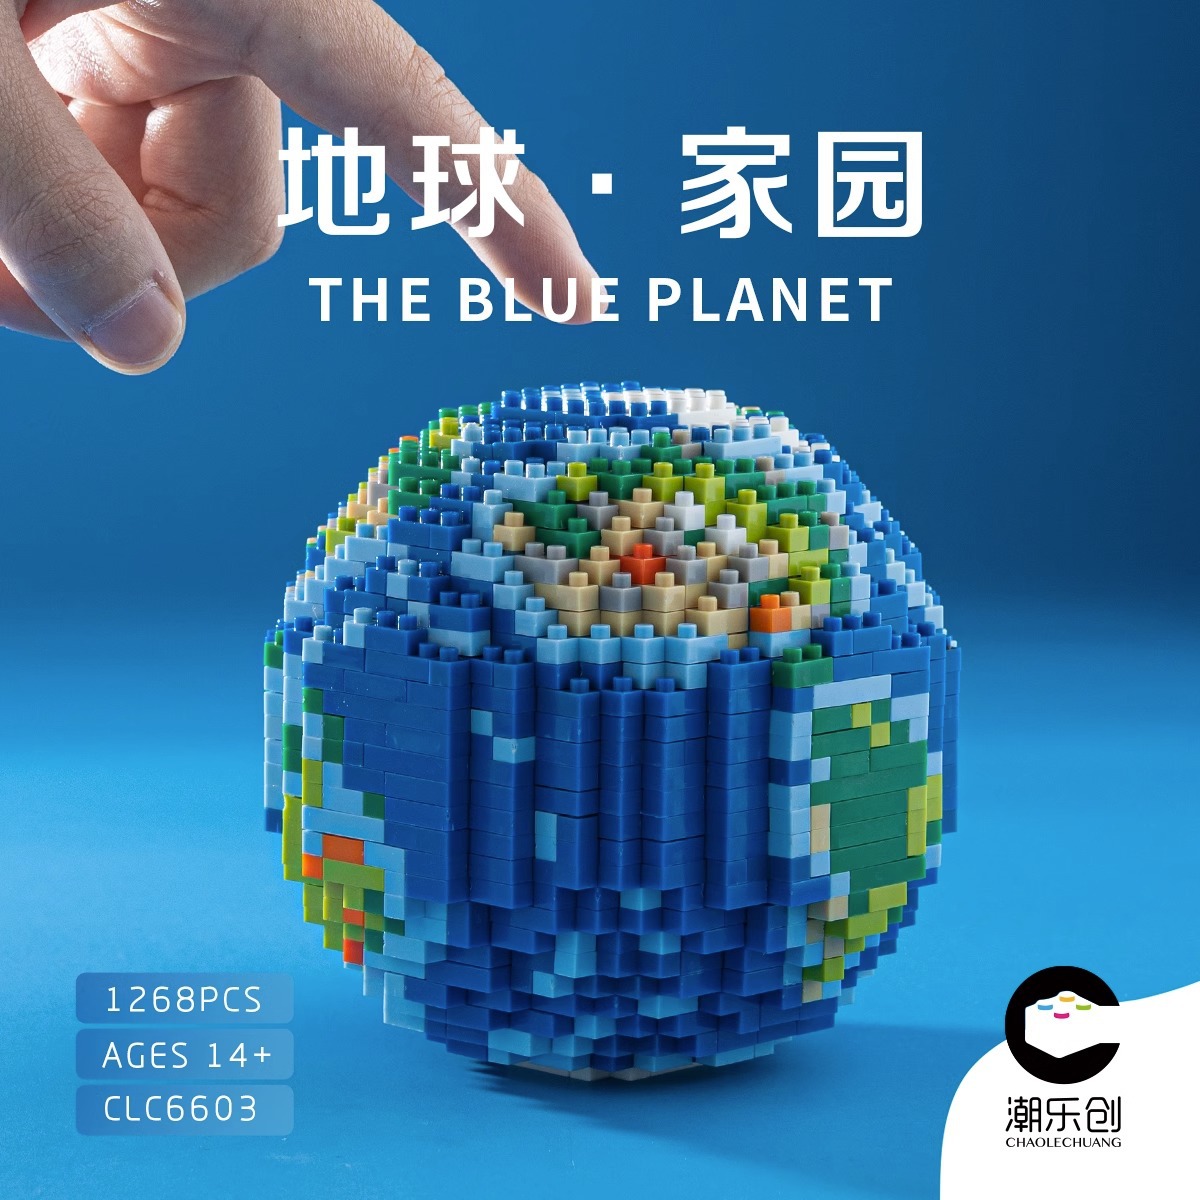 Chao Lechuang is compatible with Lego Climax Play 6603 pixels Earth Micro